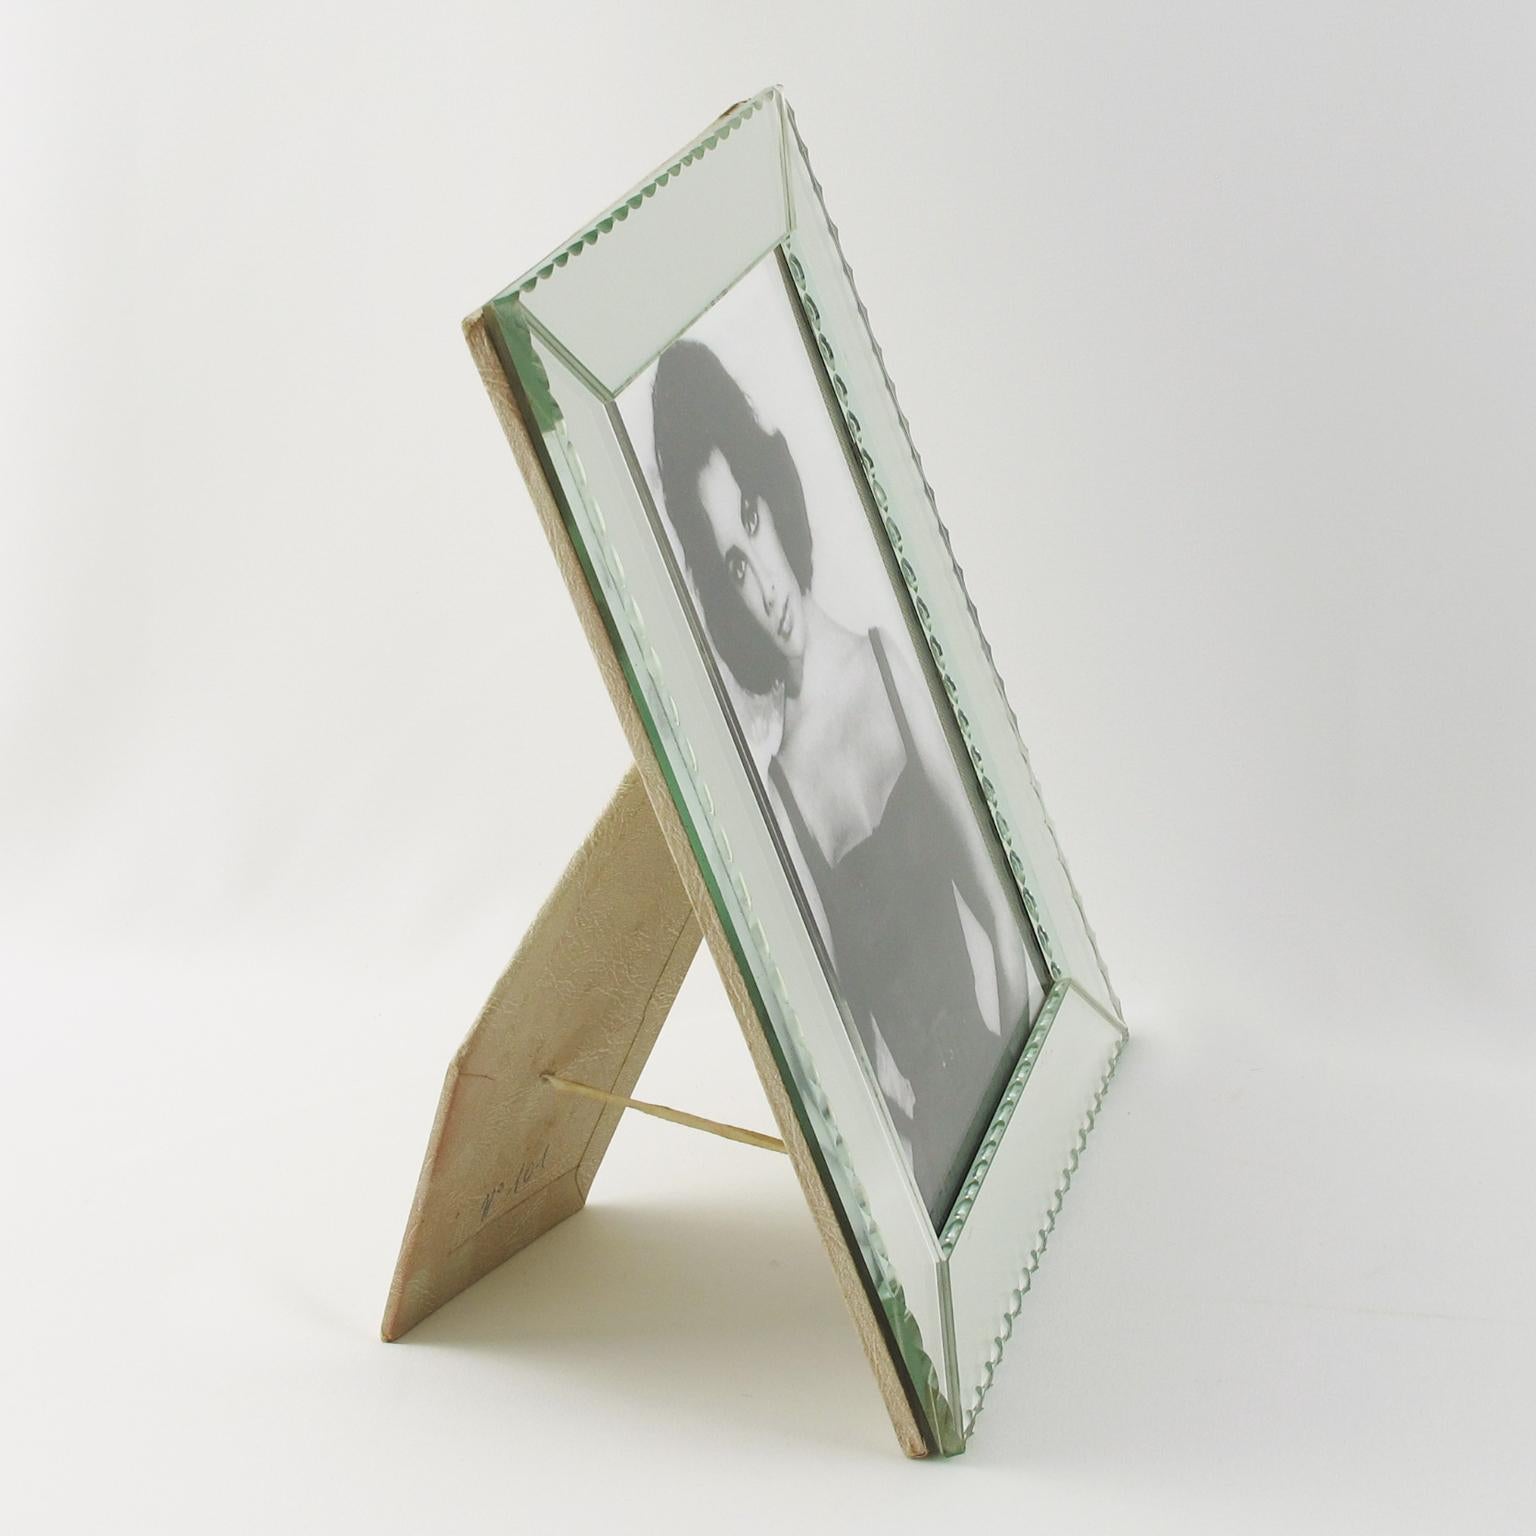 Elegant French Hollywood Regency mirror picture photo frame. Lovely clear mirrored glass beveled edges with geometric design. The picture frame can be placed either in portrait or in landscape position. Easel and back in decorative